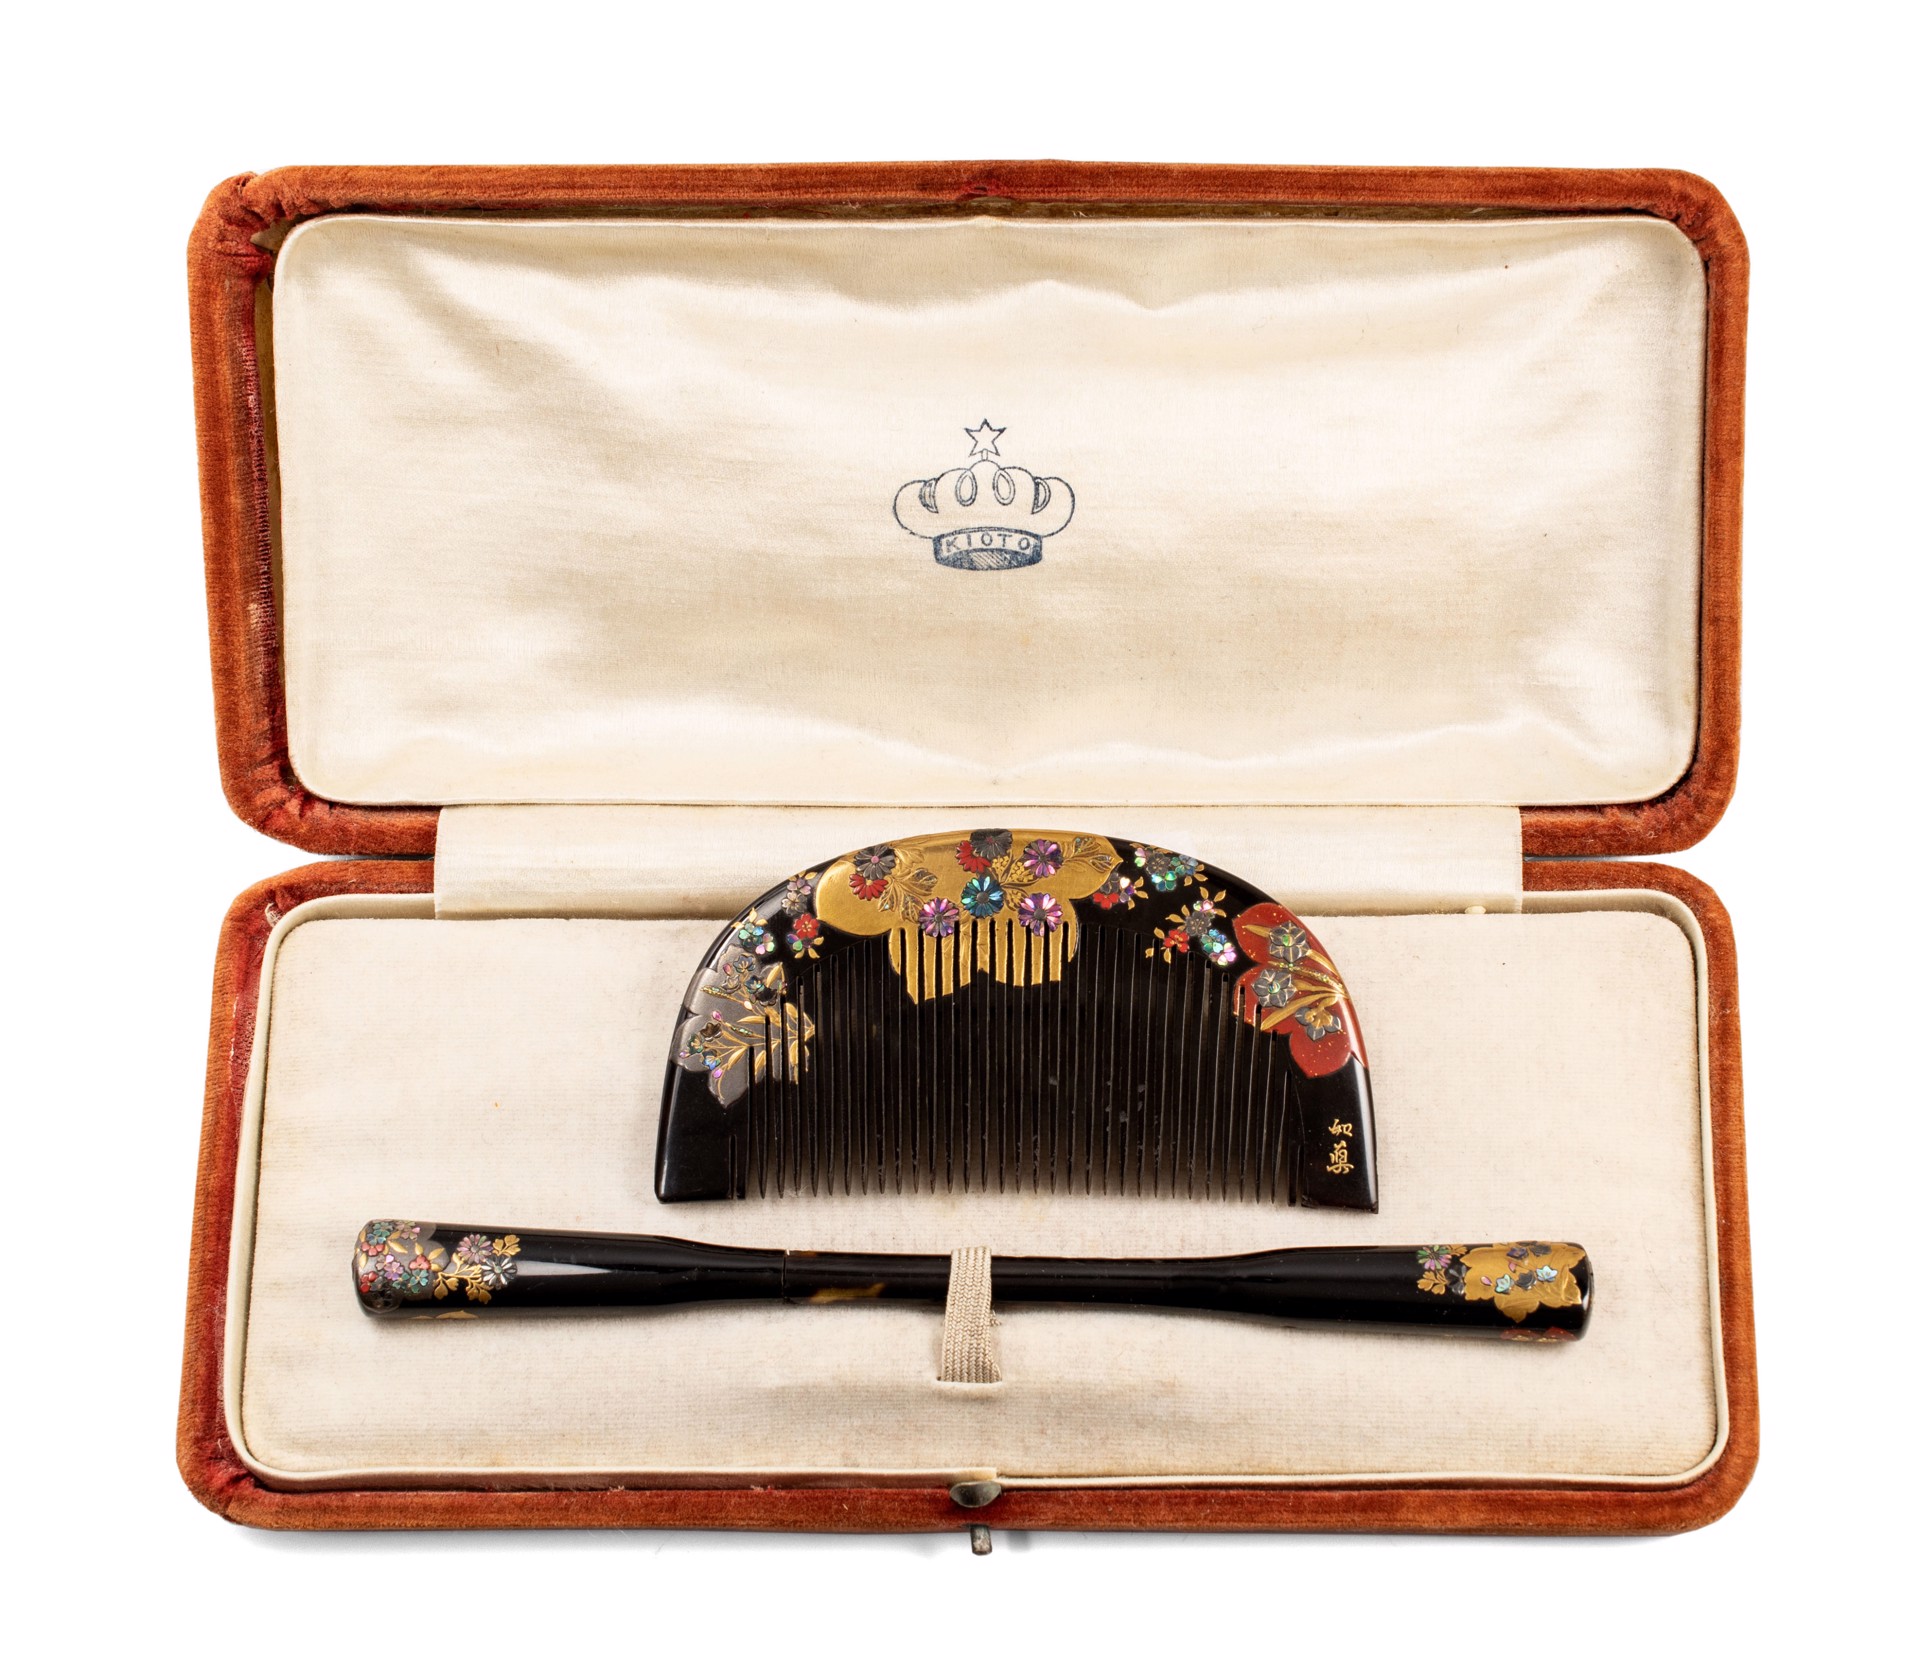 Vintage set of Comb and hairstick (the hairstick is called "kogai" in Japanese) by Kimono Accessories